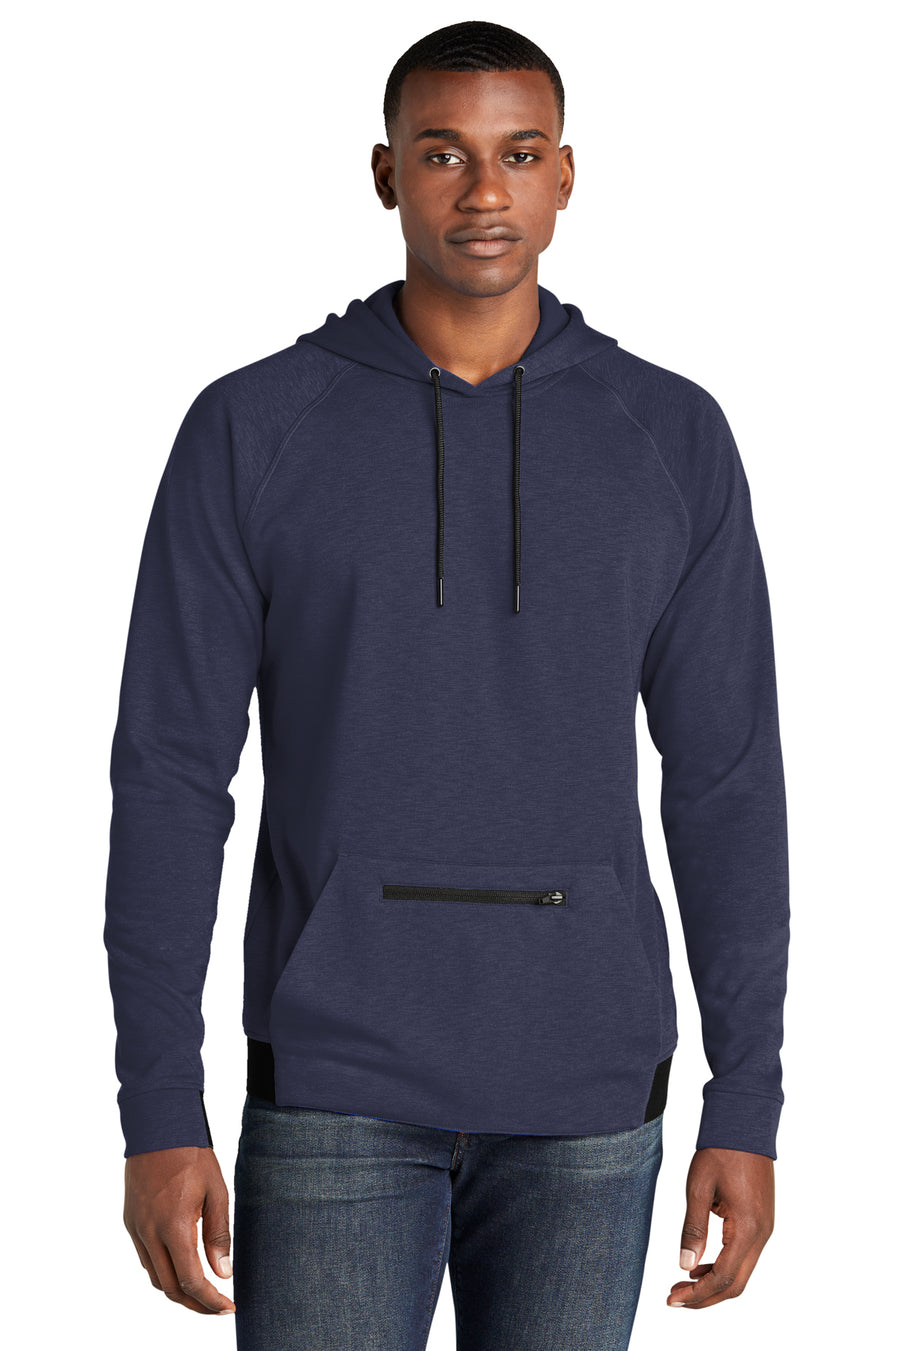 Men's High Performance Hooded Pullover